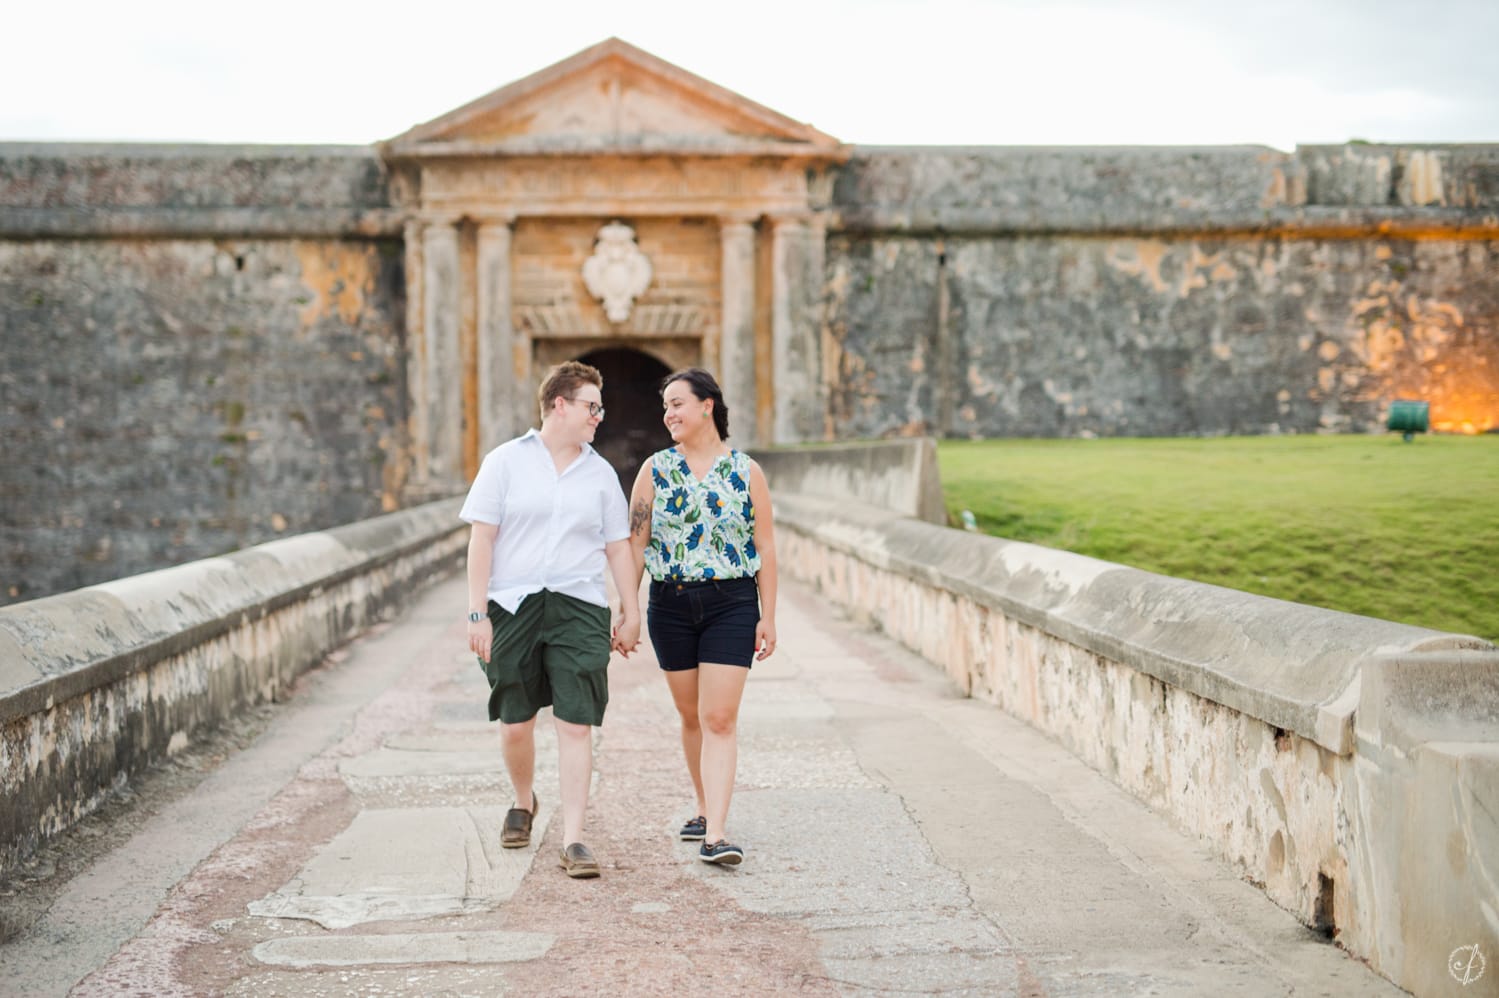 lgbt friendly wedding photographer Camille Fontanez captures Emily and Ana's engagement vacation portrait session in Old San Juan, Puerto Rico